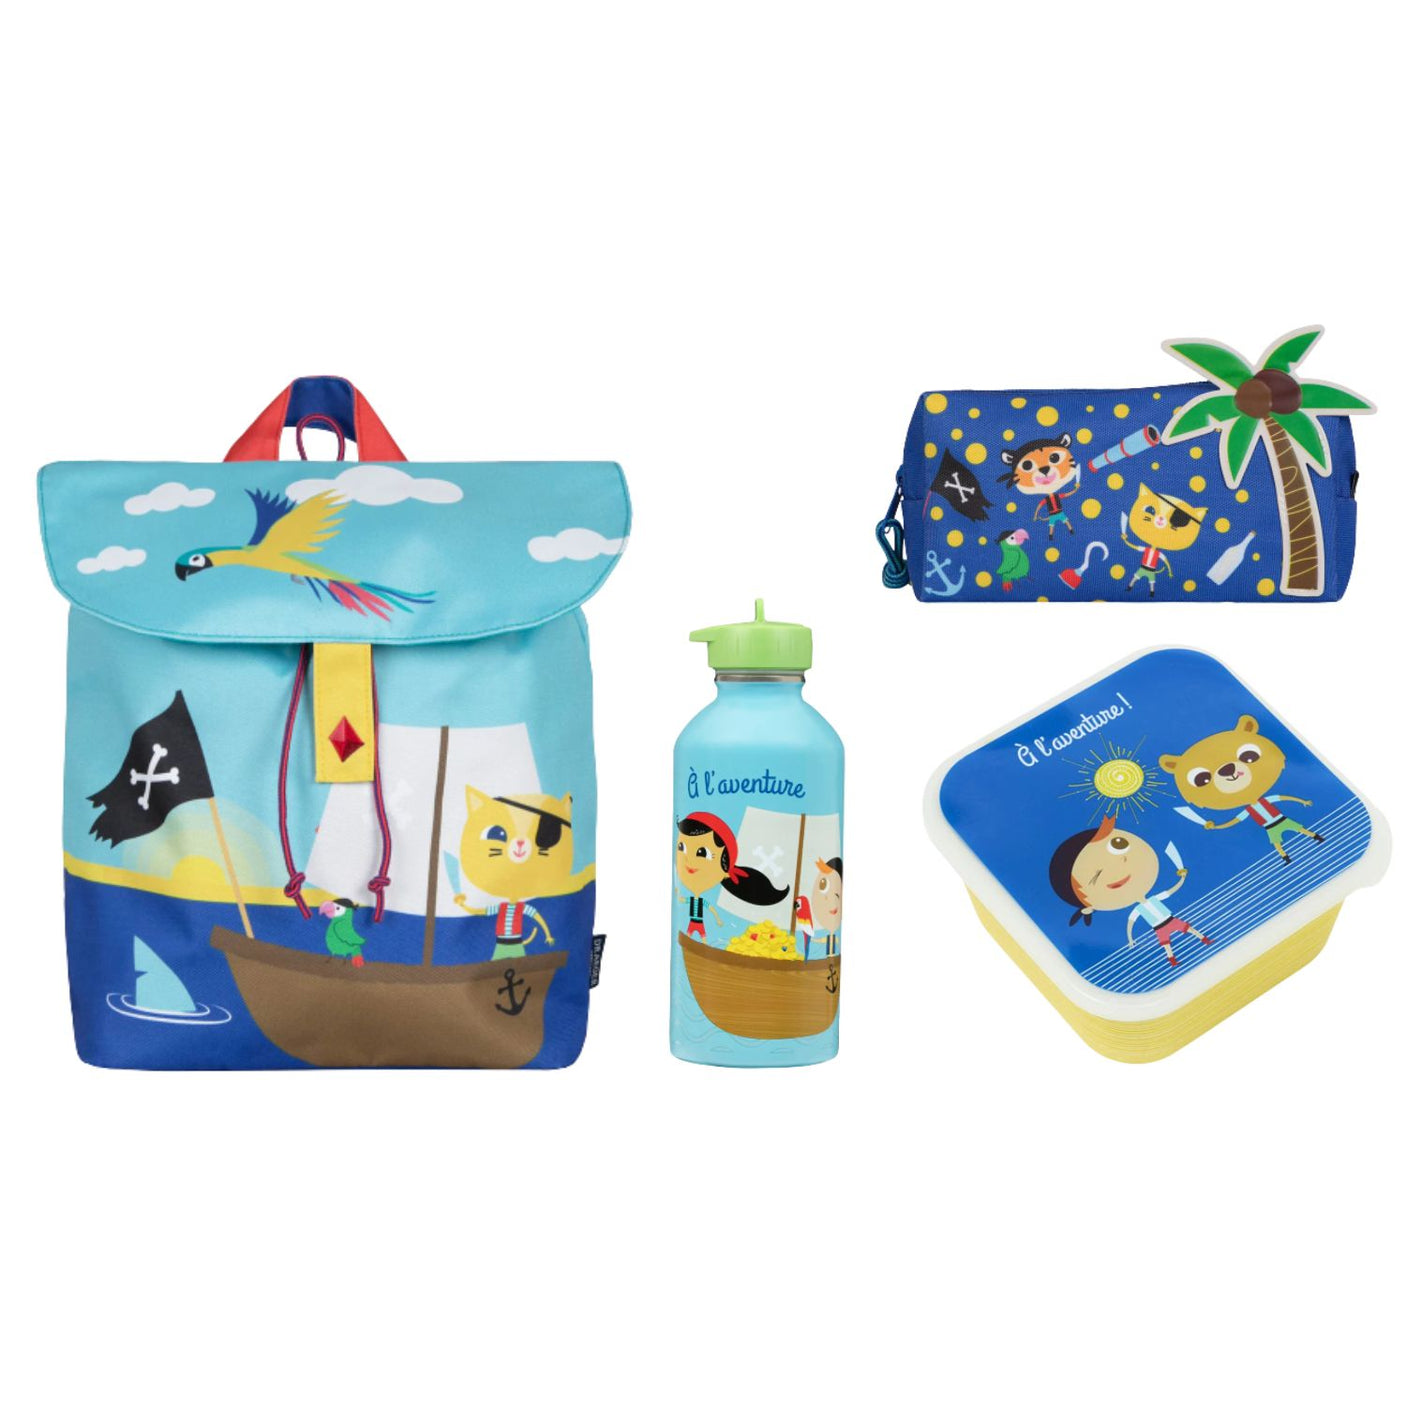 Pirate Back to School Kit: Pirates Backpack, Large Pencil Case, Water Bottle and Snack Box